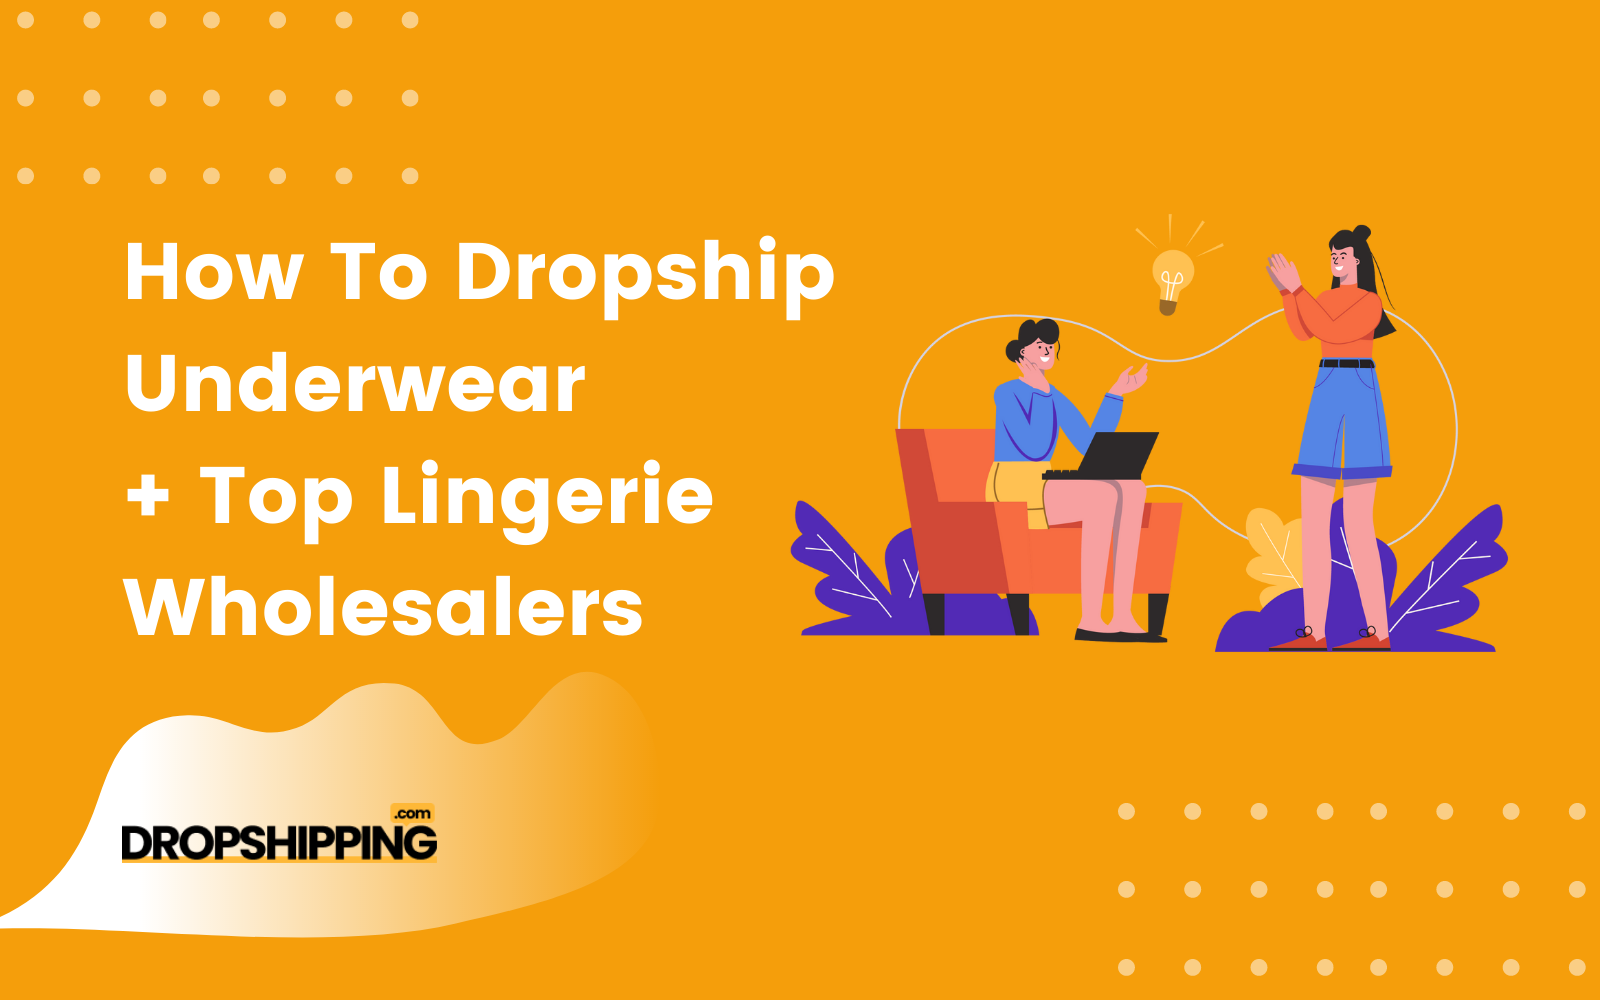 YOUR OWN ADULT LINGERIE/TOYS/PRODUCTS DROPSHIPPING WEBSITE BUSINESS-100% PROFITS 